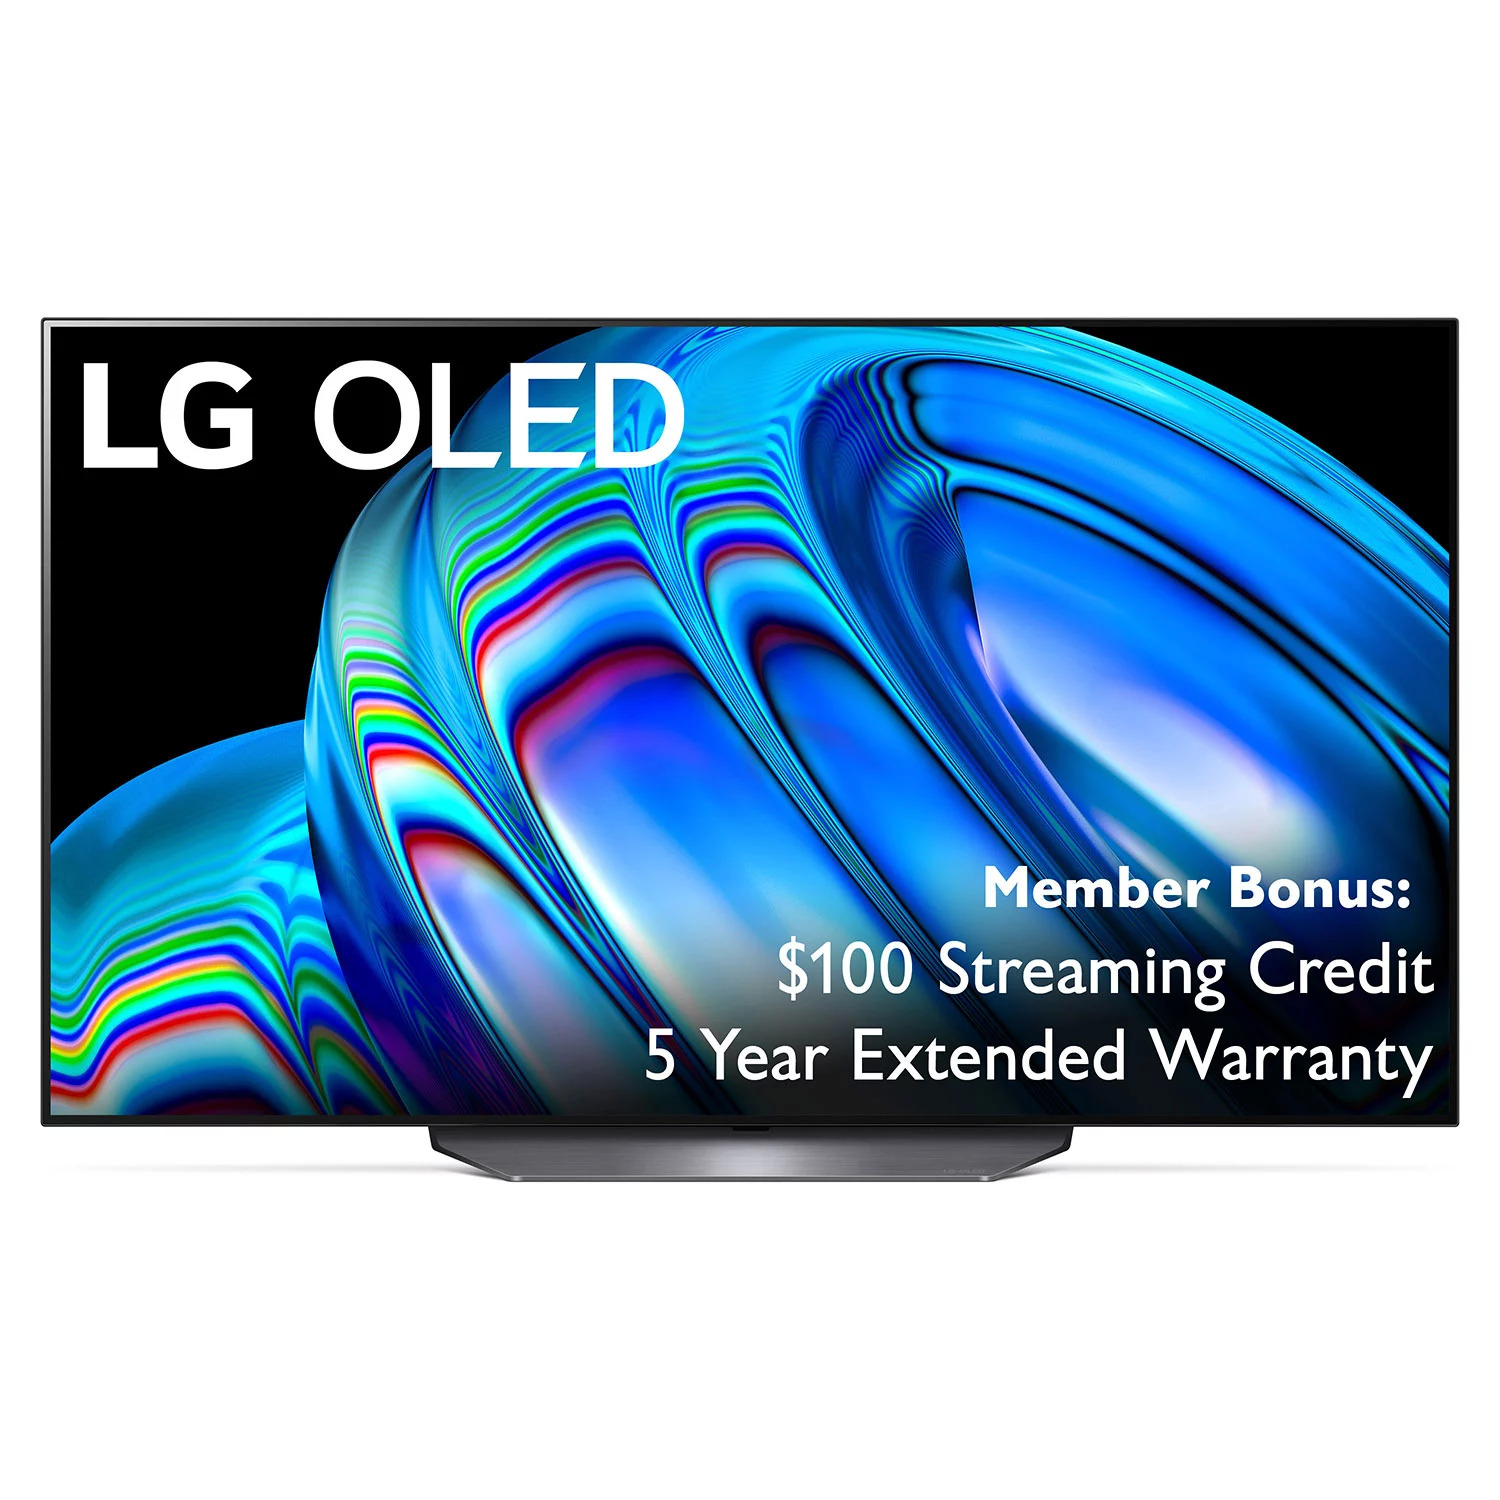 LG 65" Class B2 AUA Series OLED 4K UHD 65OLEDB2AUA and 5 YEAR ALL STATE PROTECTION PLAN $959 (Florida maybe other locations)